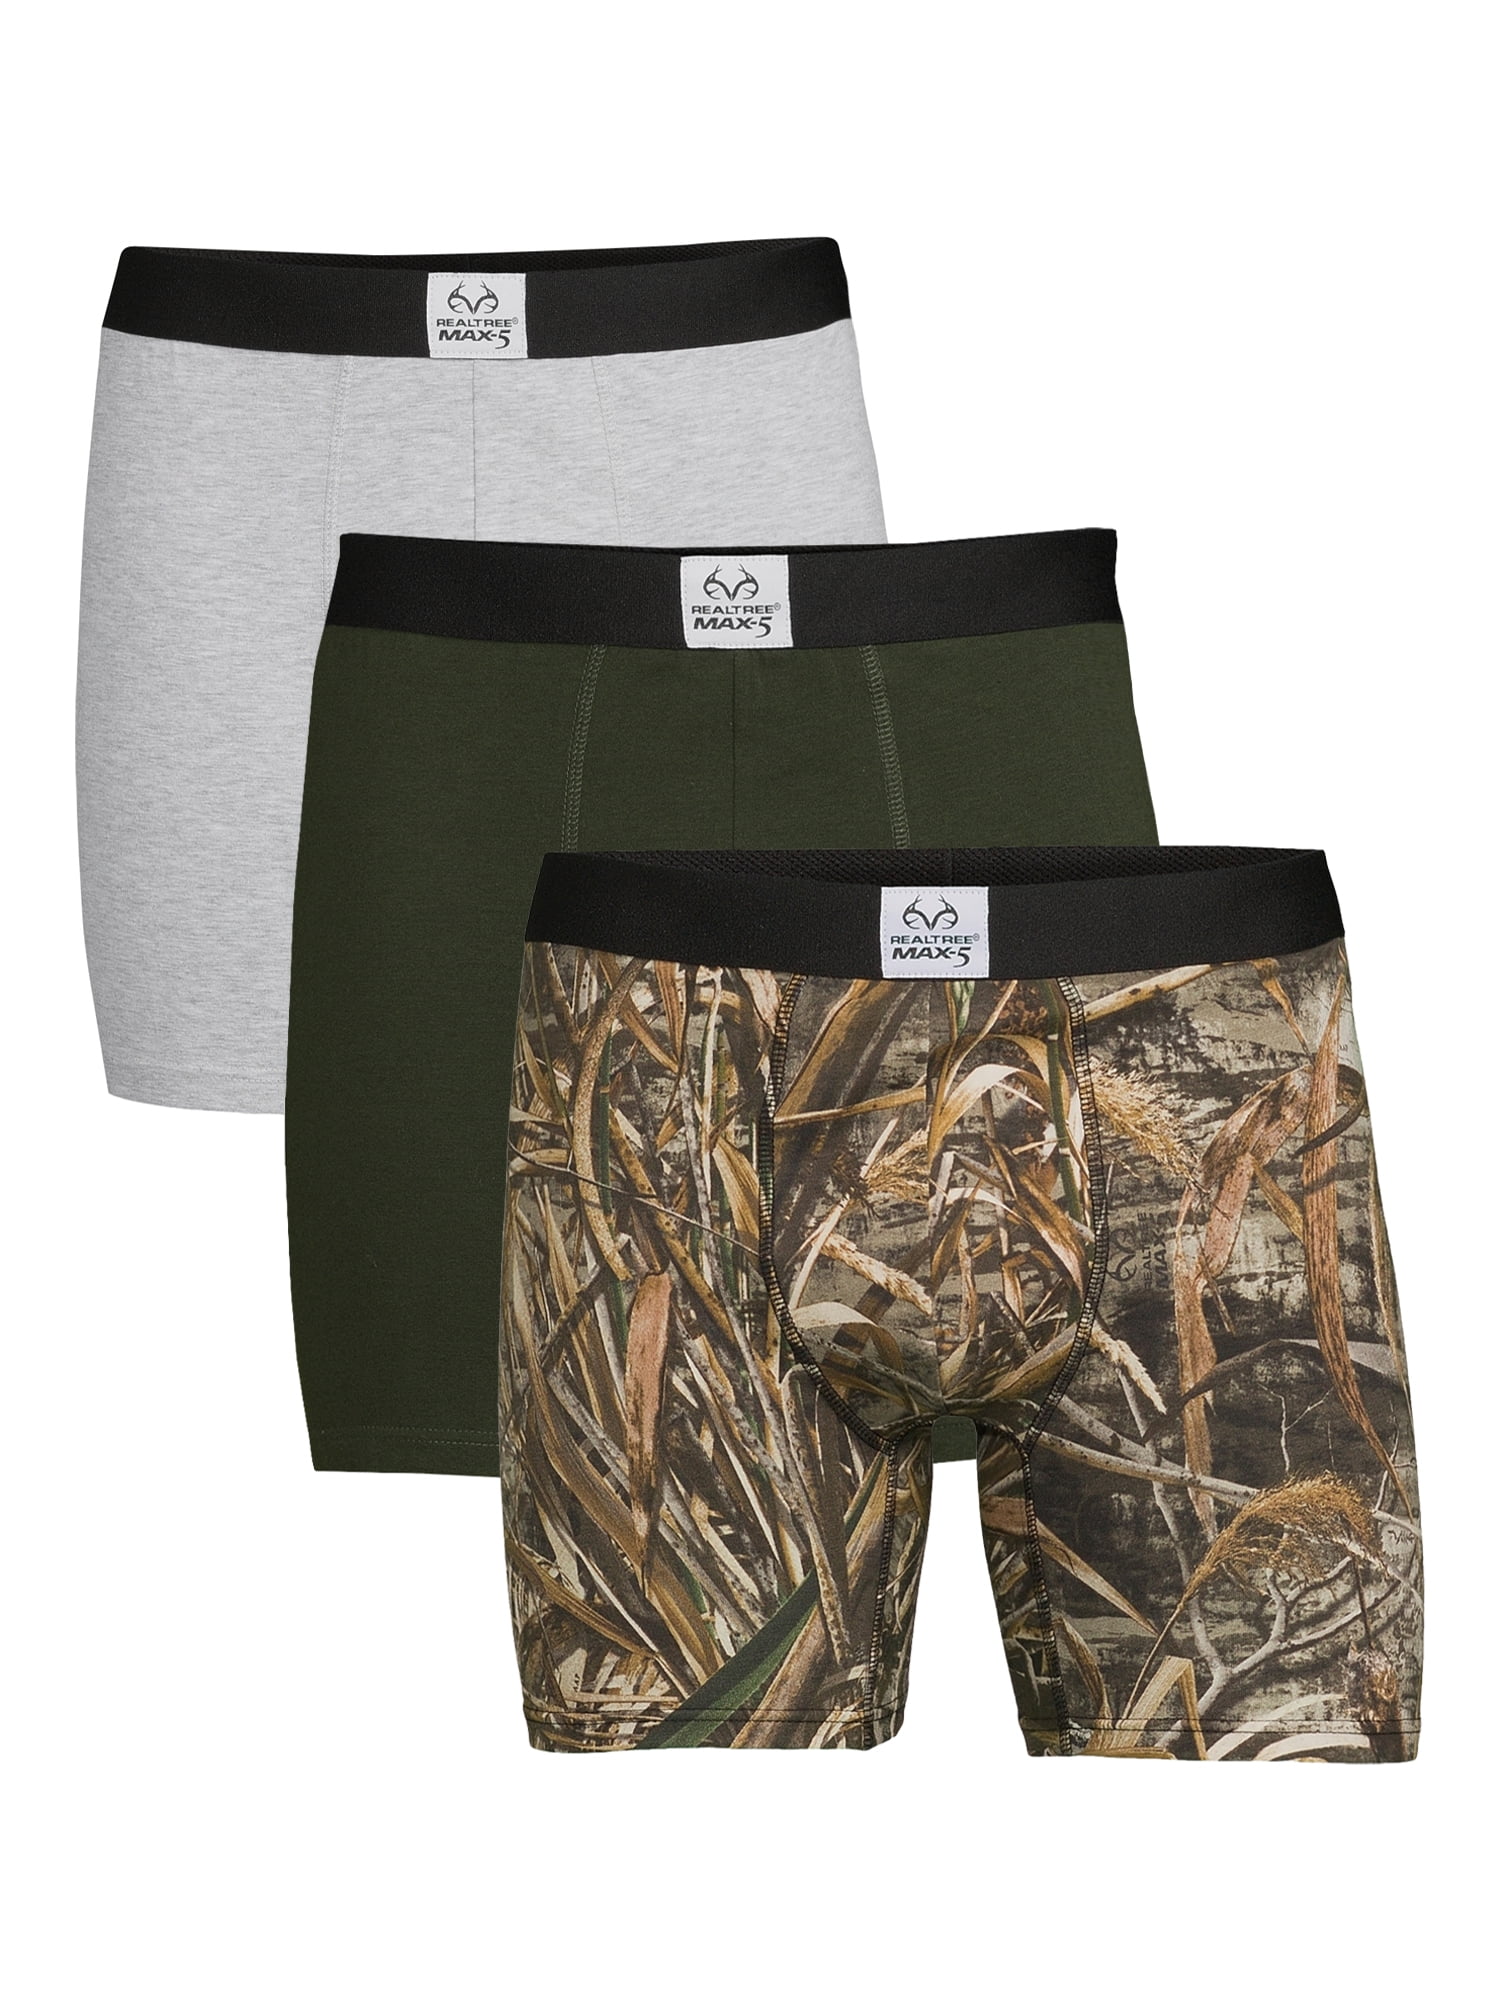 Realtree 3-Pack Adult Sizes Briefs, S-XL Boxer Stretch Cotton Mens